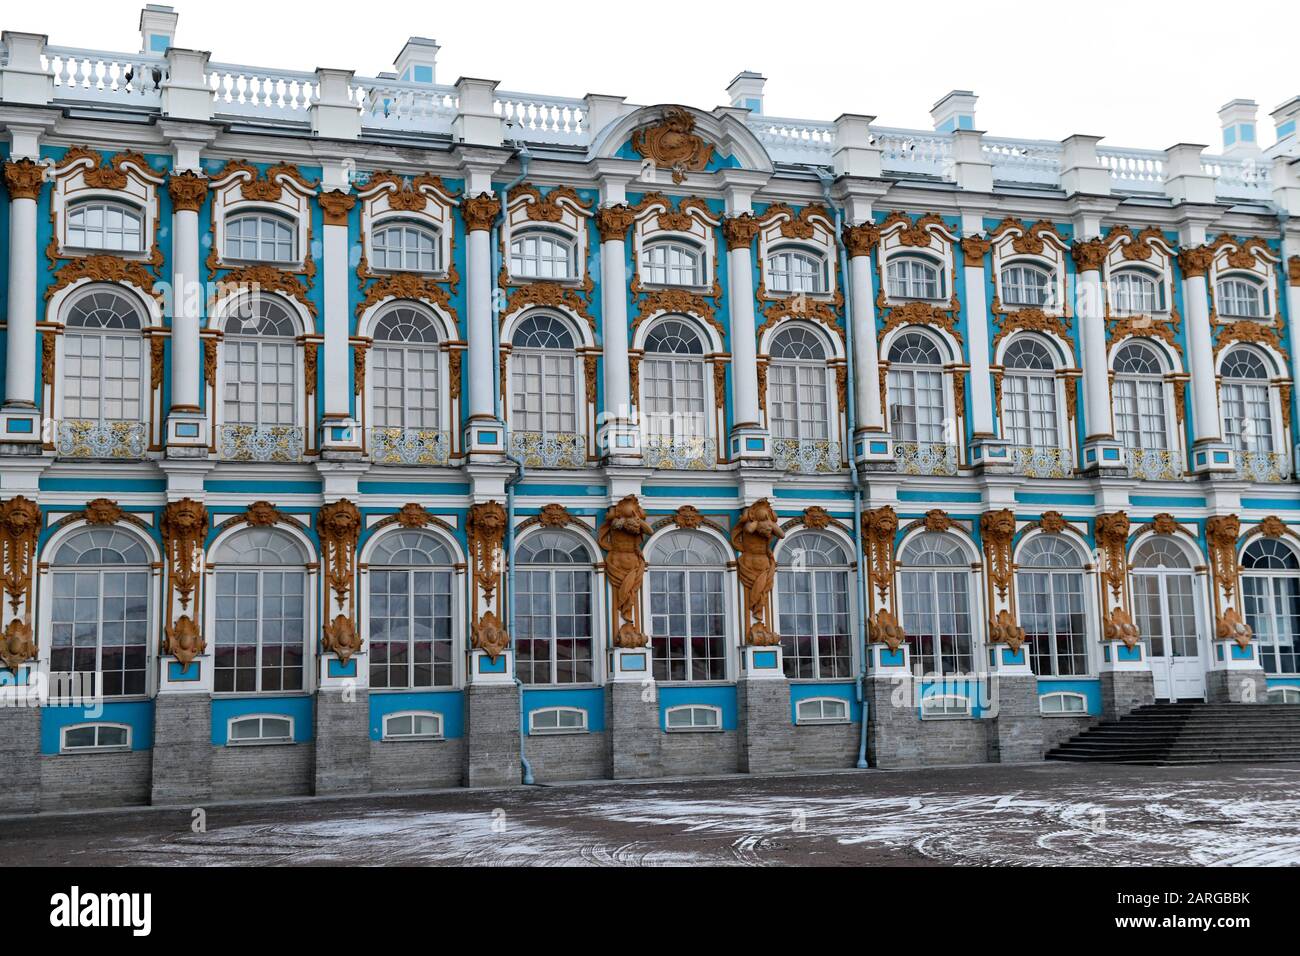 Caterine's Palace at Pushkin in St. Petersburg,Russia. Stock Photo